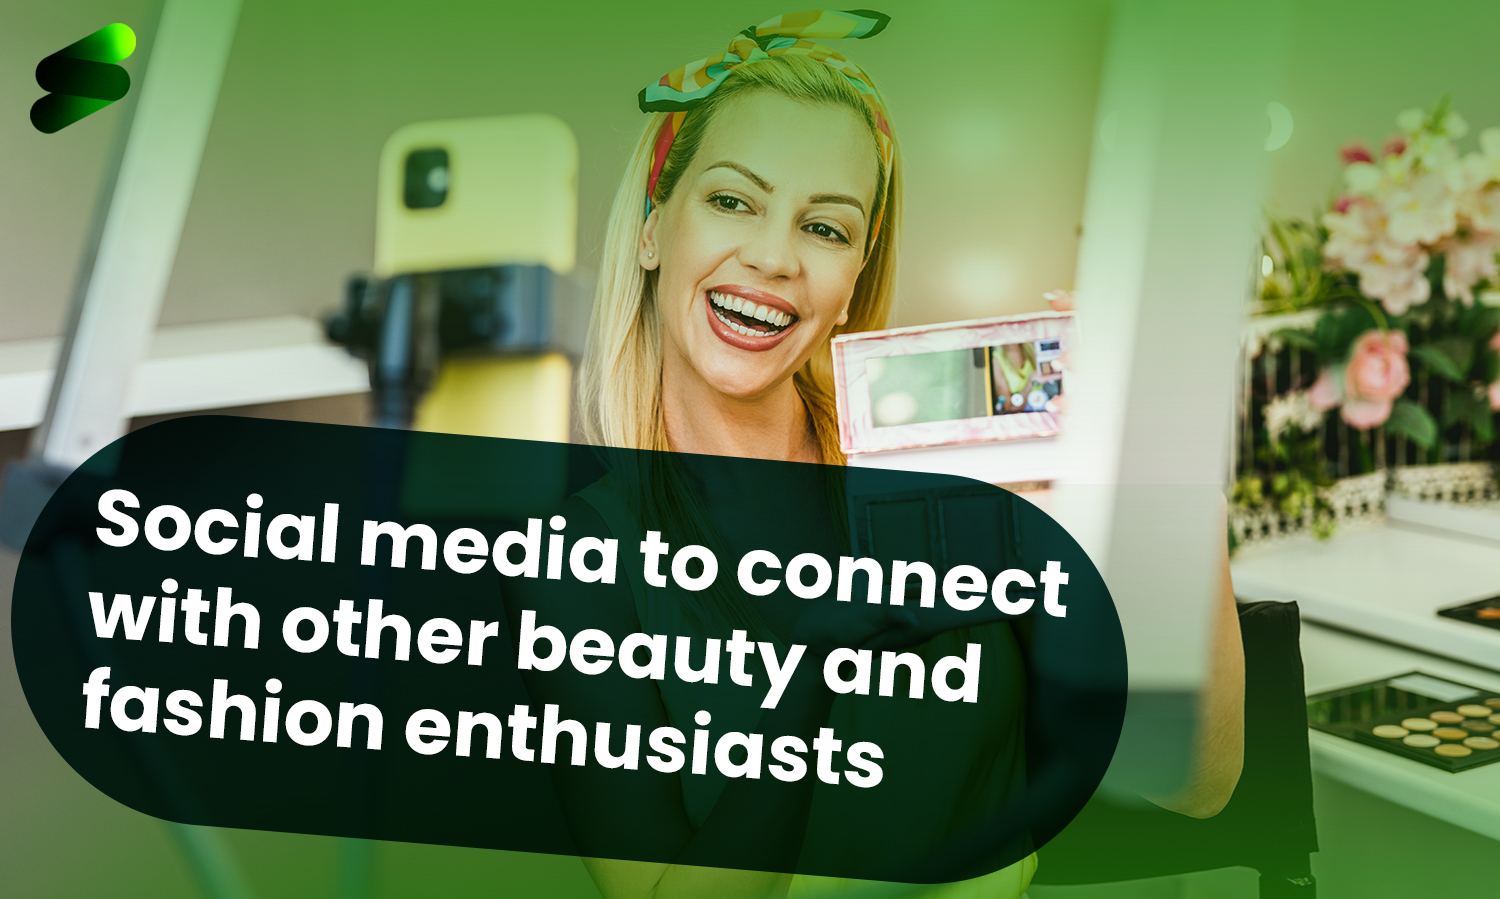 How to use social media to connect with other beauty and fashion enthusiasts